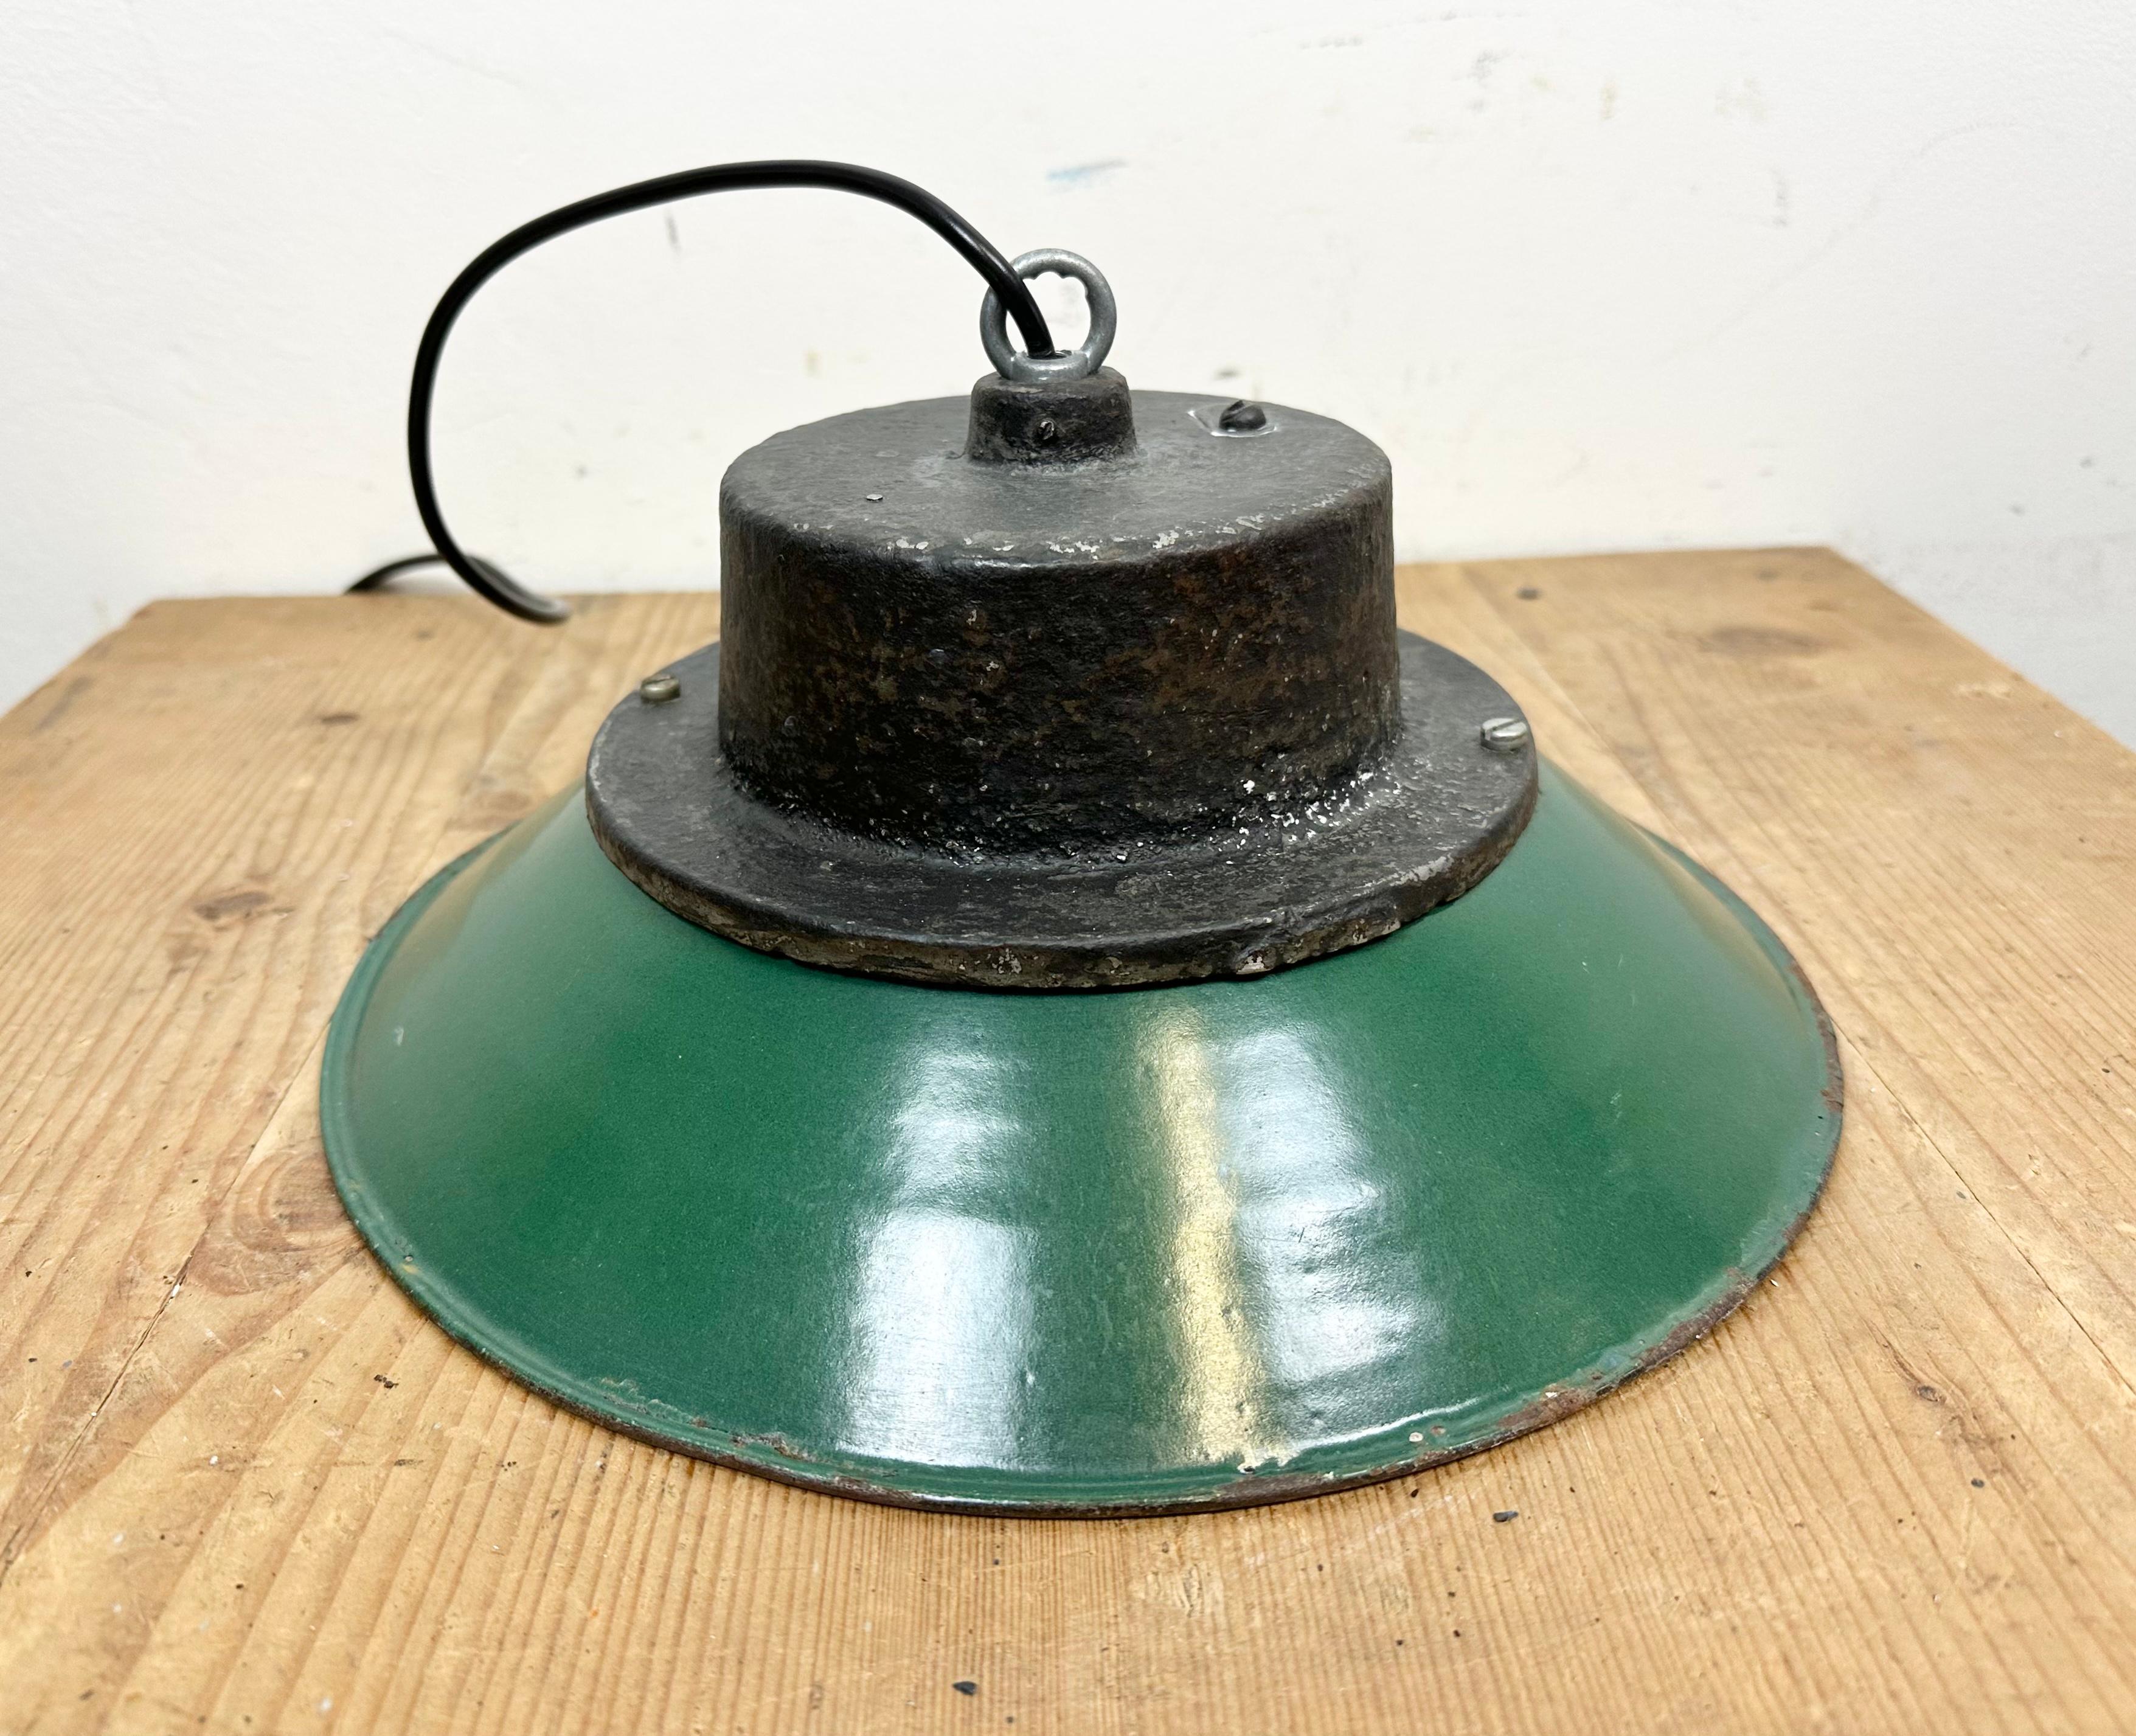 Green Enamel and Cast Iron Industrial Pendant Light, 1960s For Sale 8